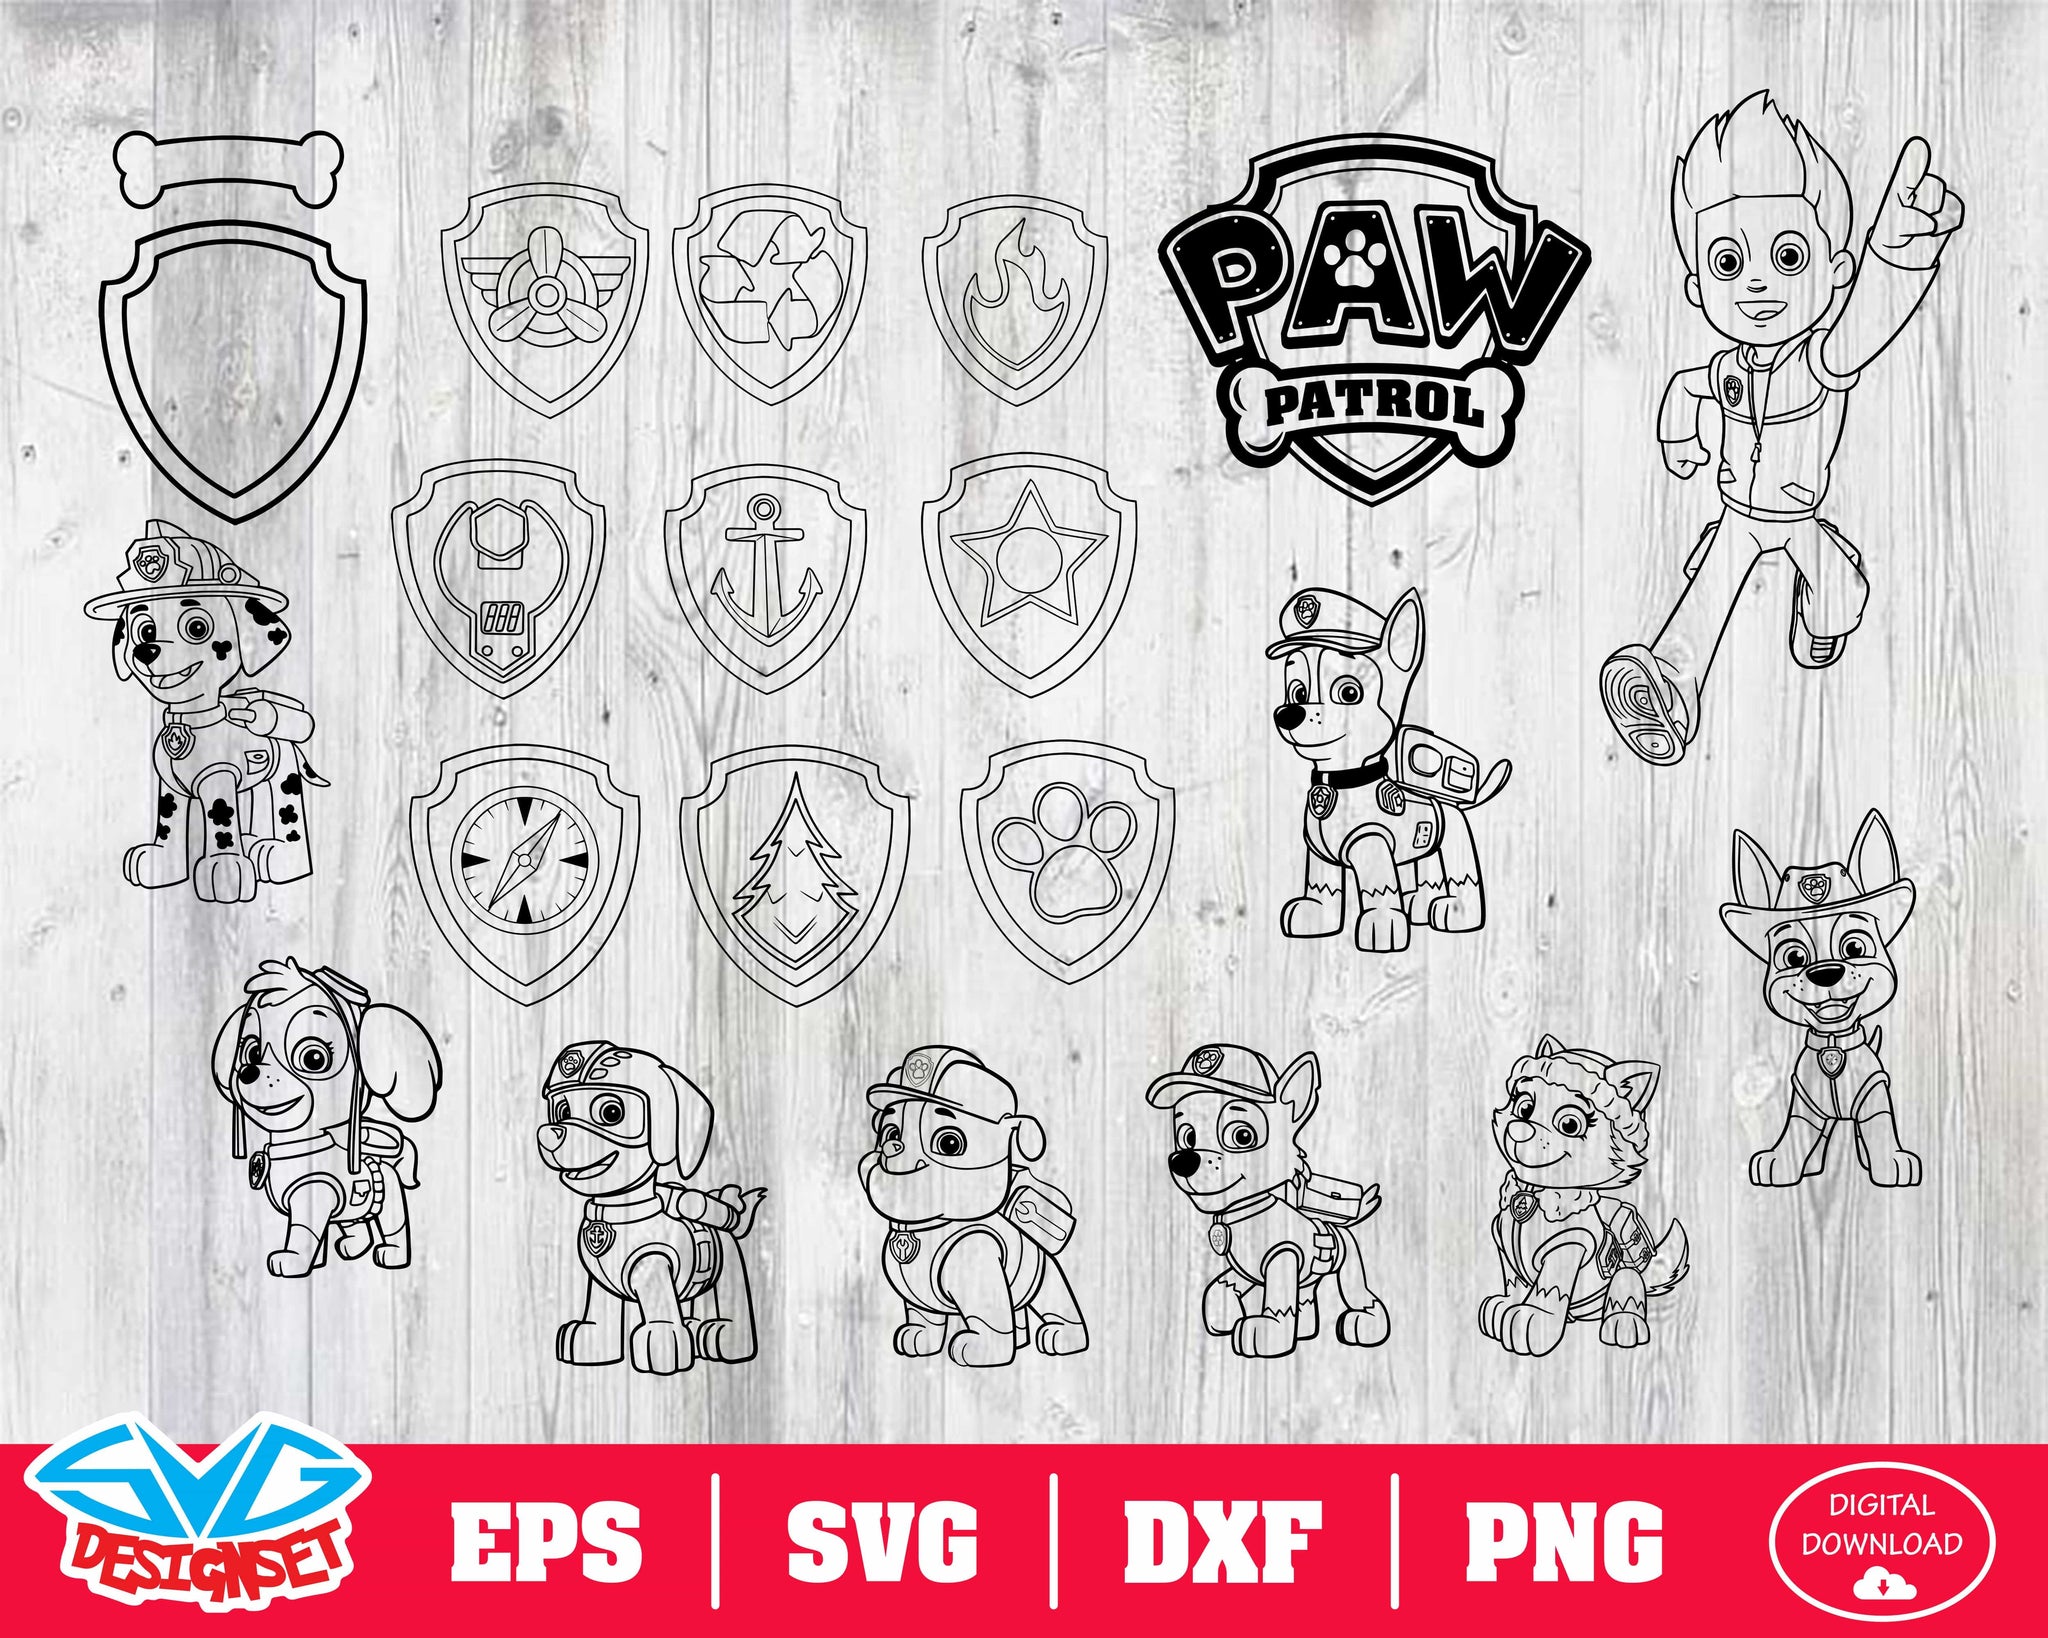 Paw Patrol Svg, Dxf, Eps, Png, Clipart, Silhouette and Cutfiles #2 - SVGDesignSets